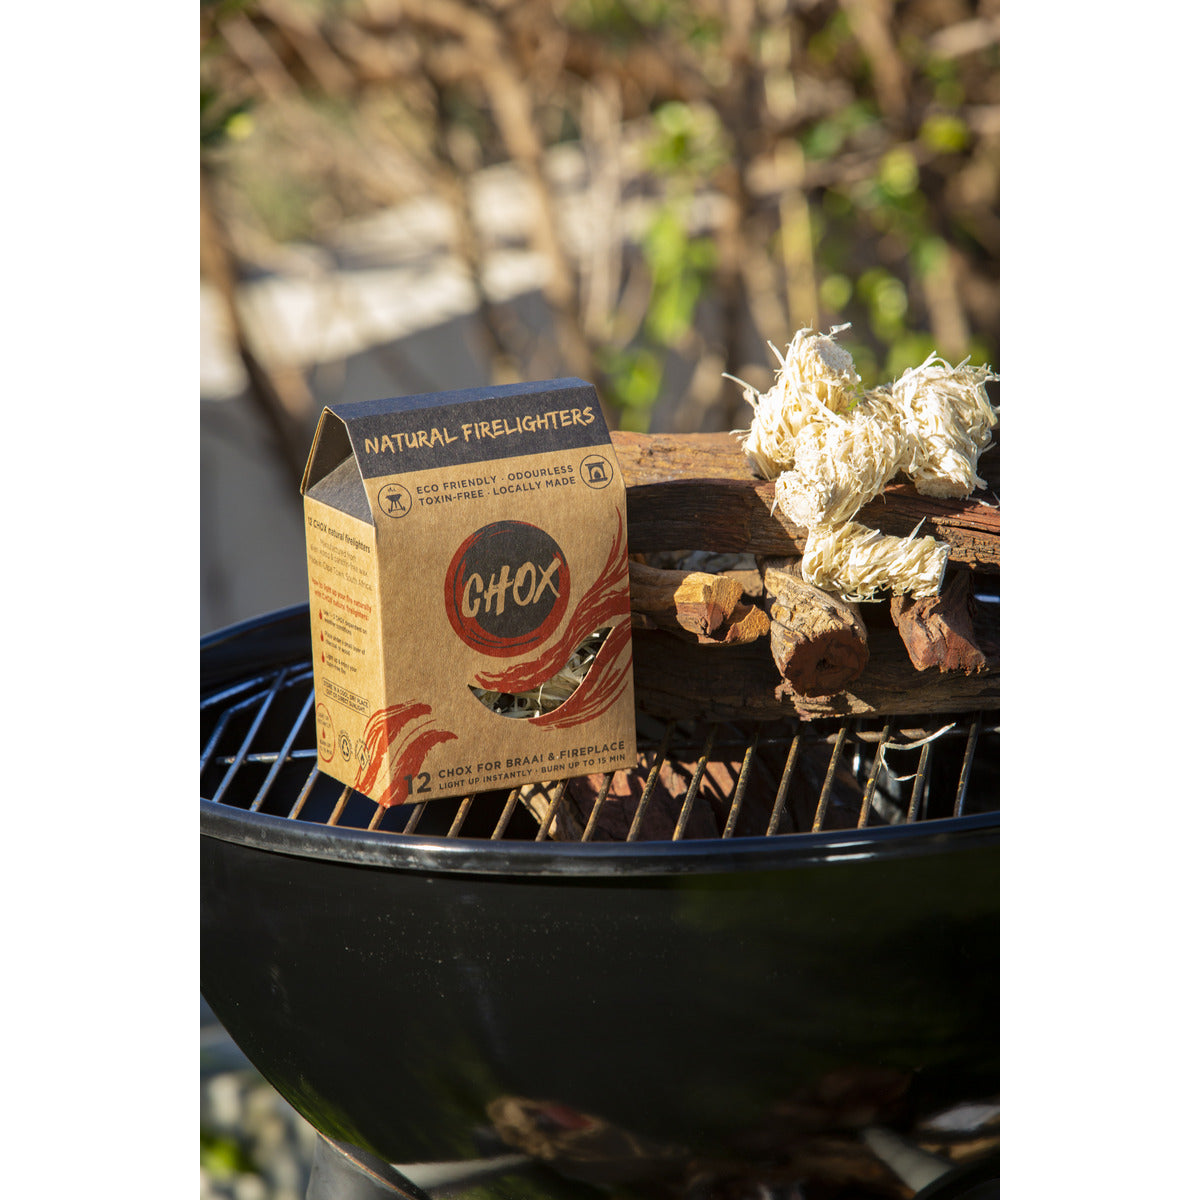 CHOX 12-Pack Natural Firelighters